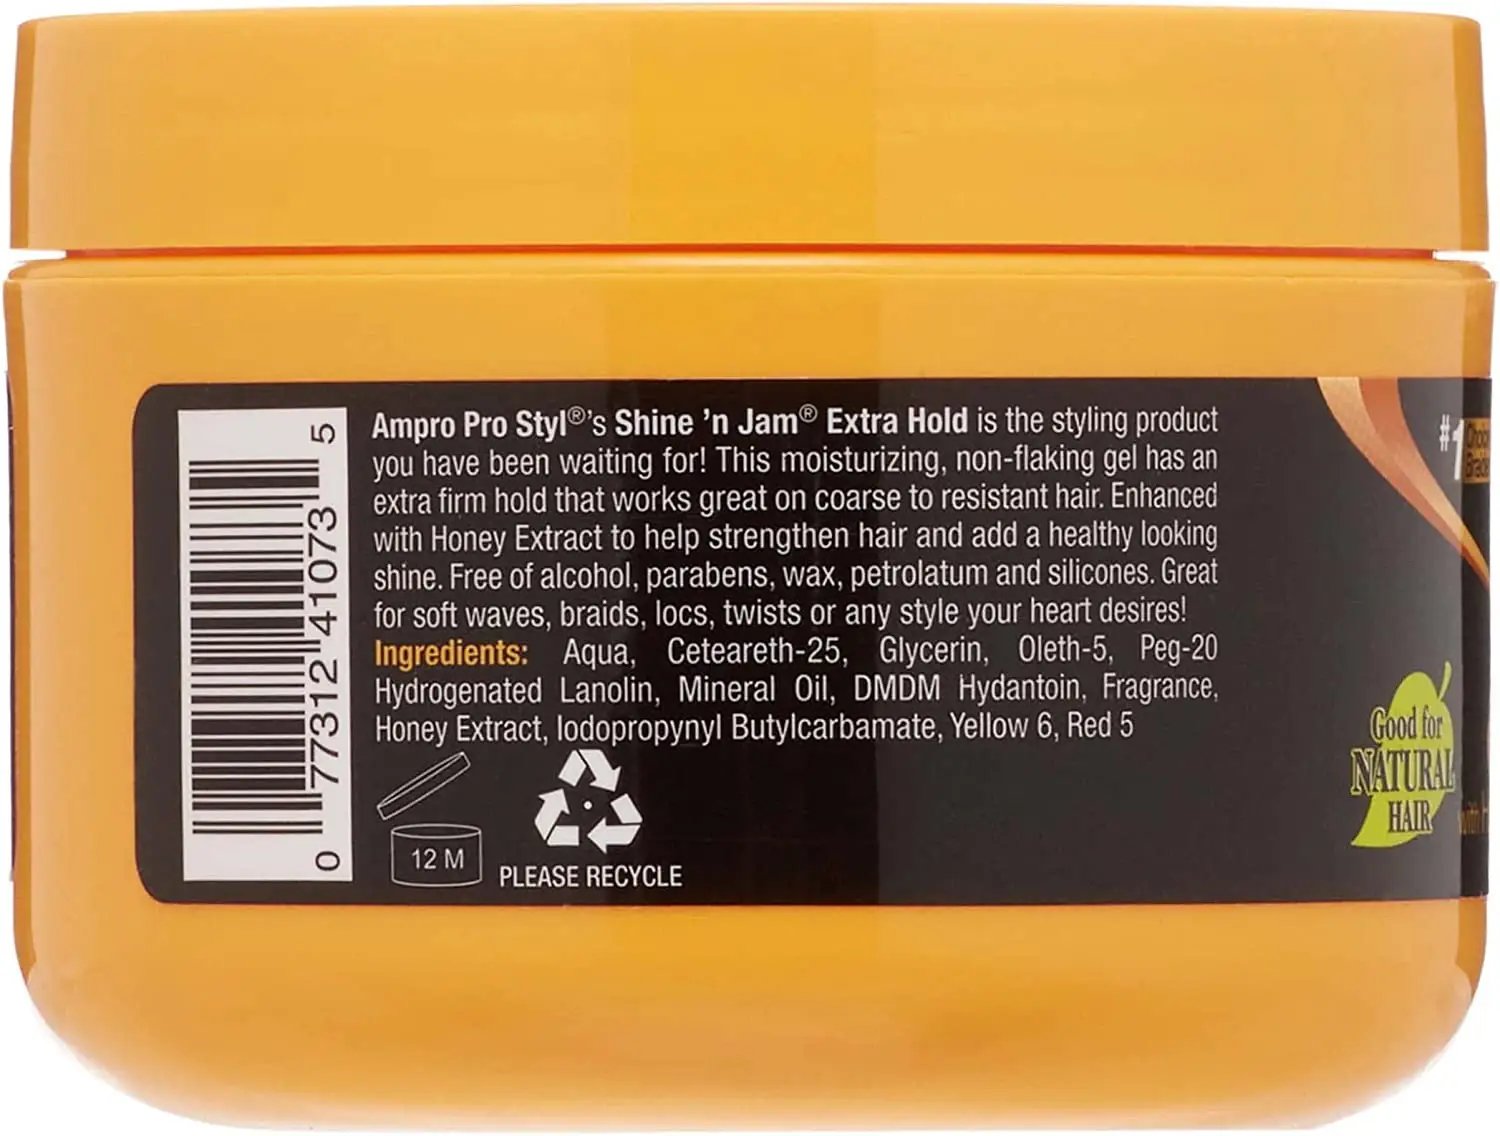 An image of the back of the product container showing the barcode and product ingredients